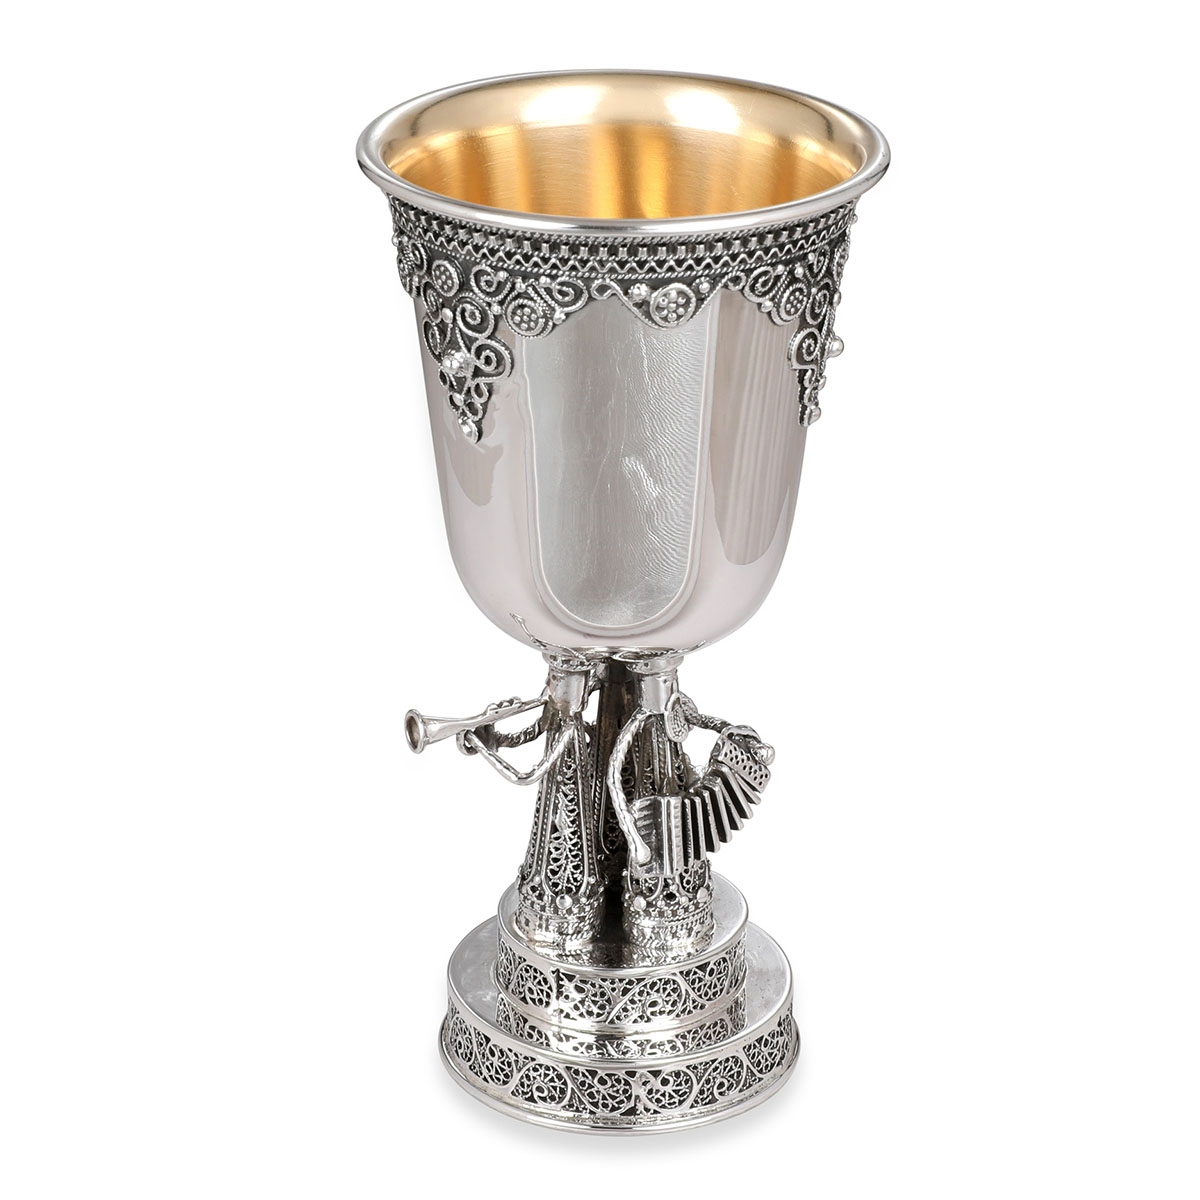 Traditional Yemenite Art Handcrafted Sterling Silver Kiddush Cup With Klezmer Figurines - 1